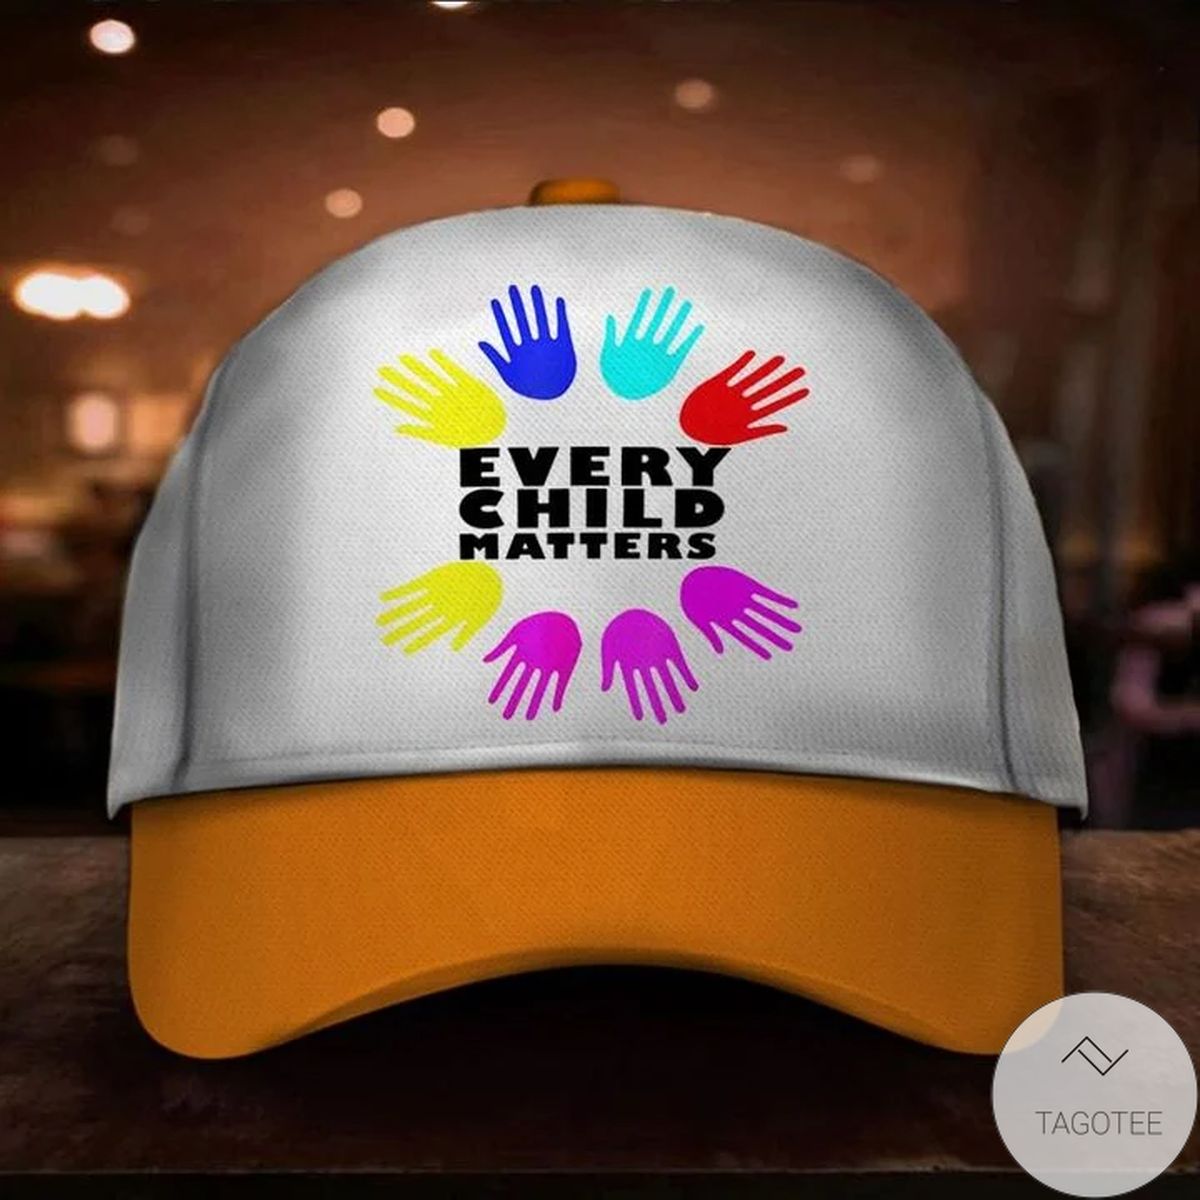 Every Child Matters Hat Native Education Orange Day Shirt Canada Movement Merch For Sale